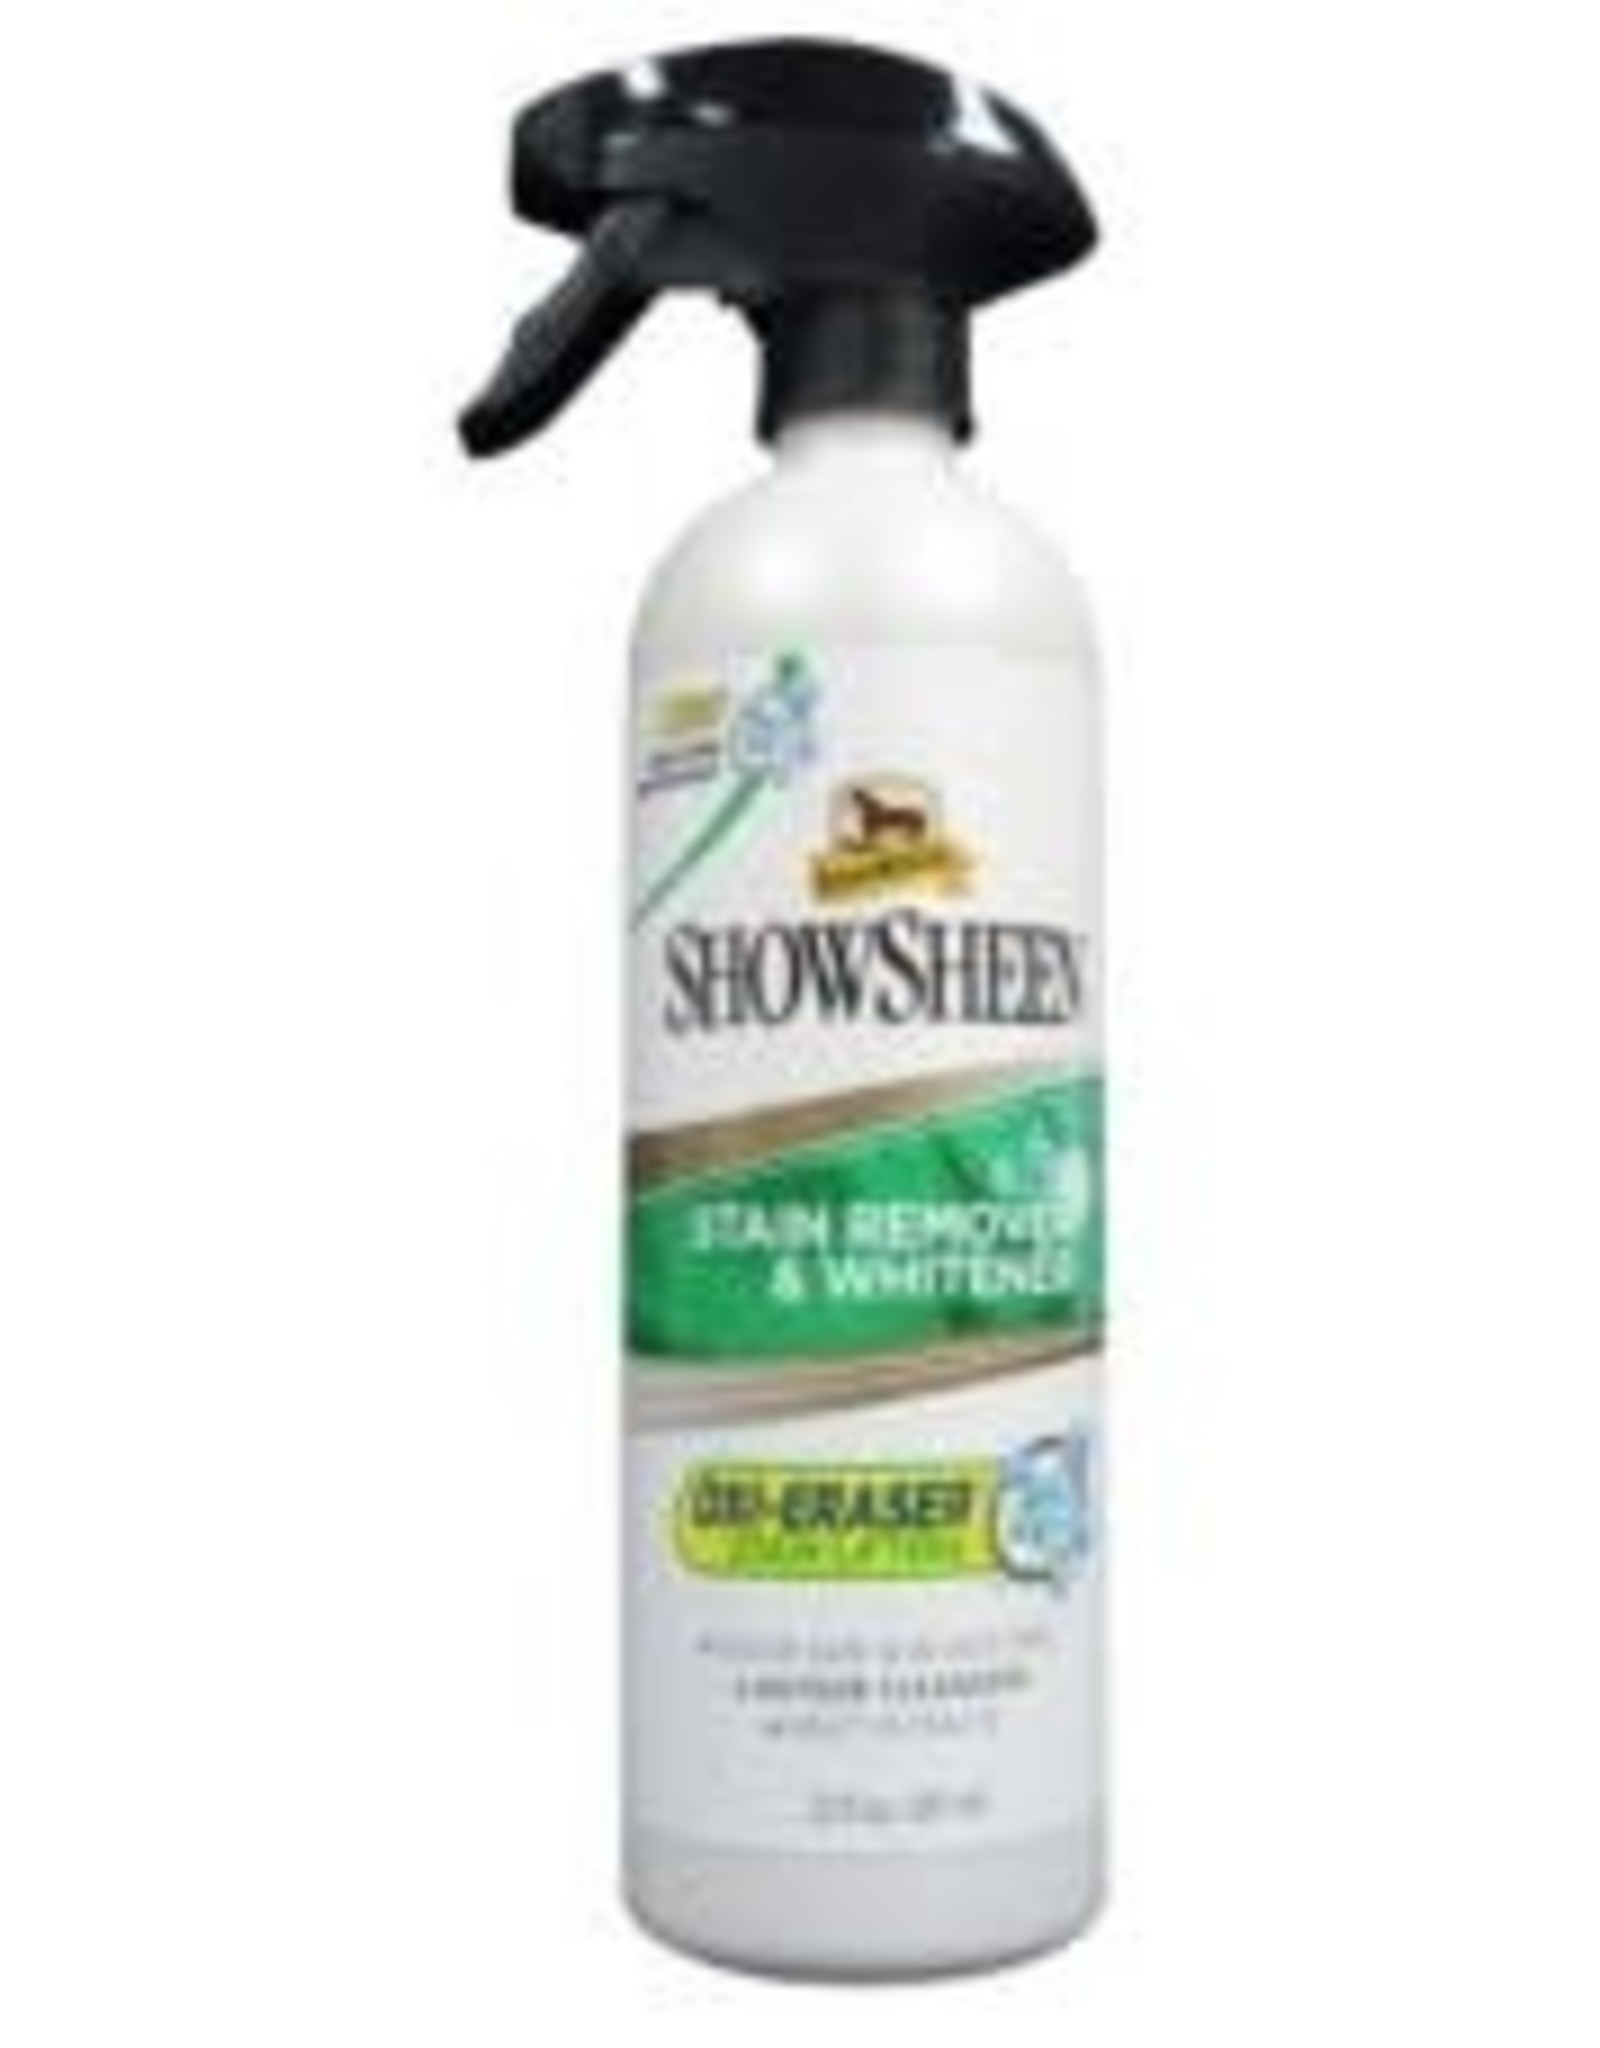 Showsheen Stain Remover and Whitener